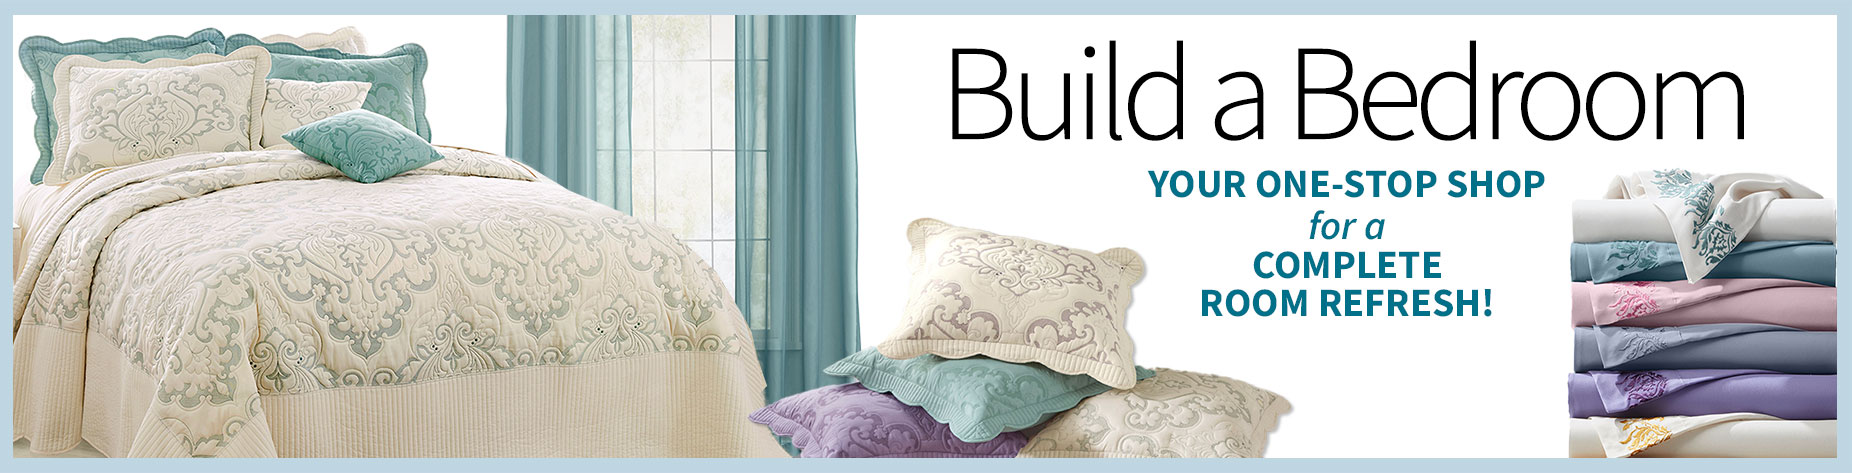 Build a Bedroom. Your one-stop shop for a complete room refresh.